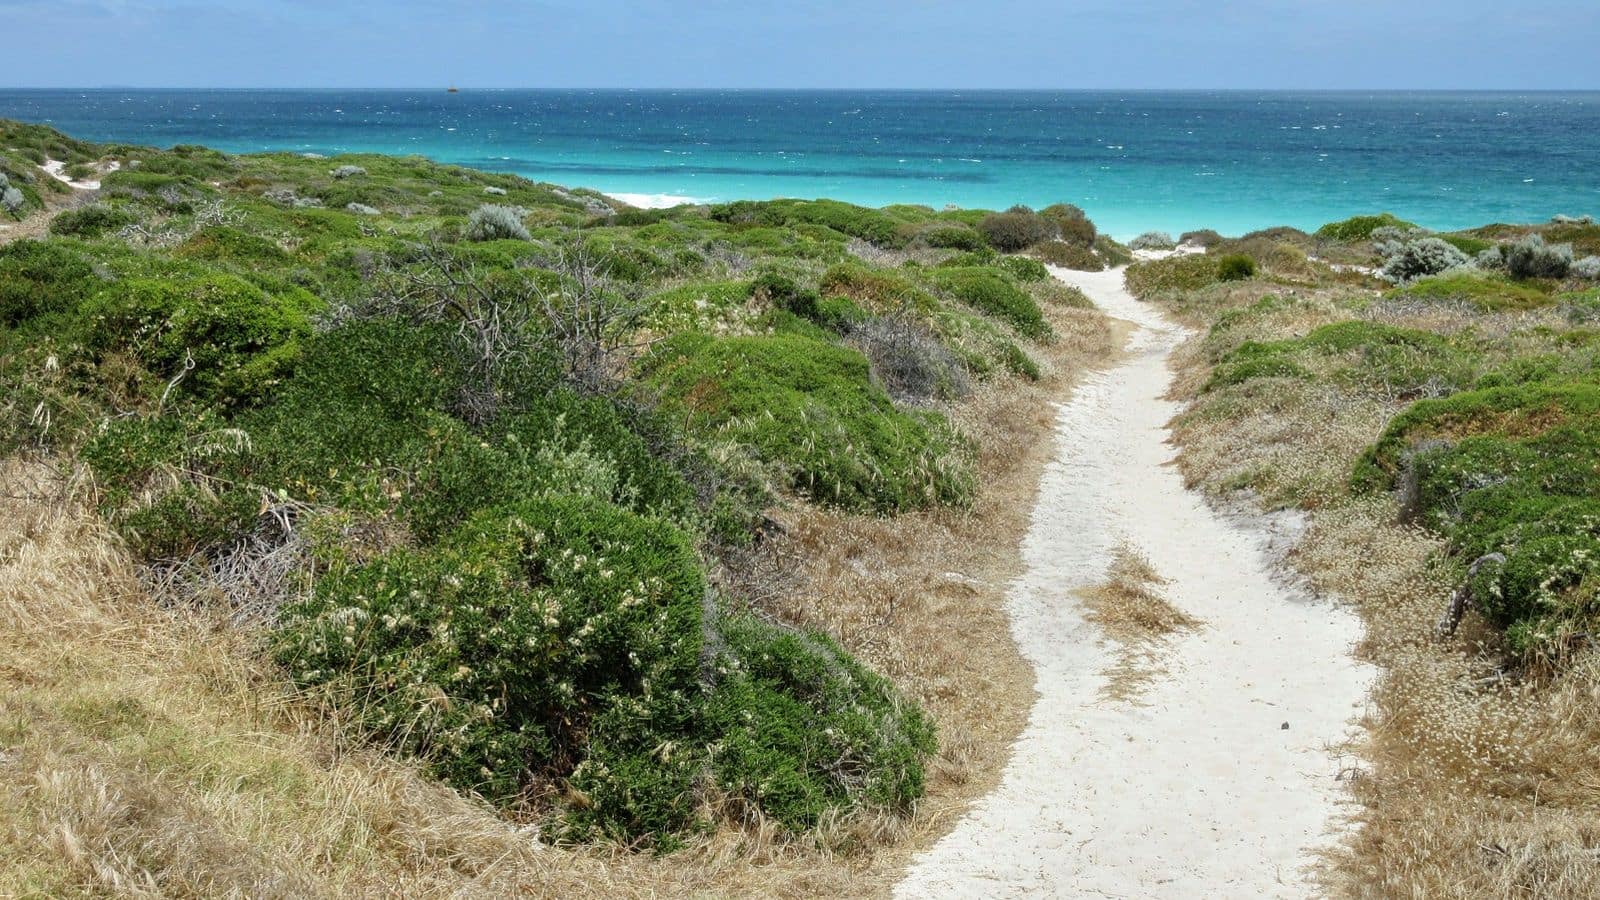 Perth's secluded coastal walks: Tranquil spots for self-reflection